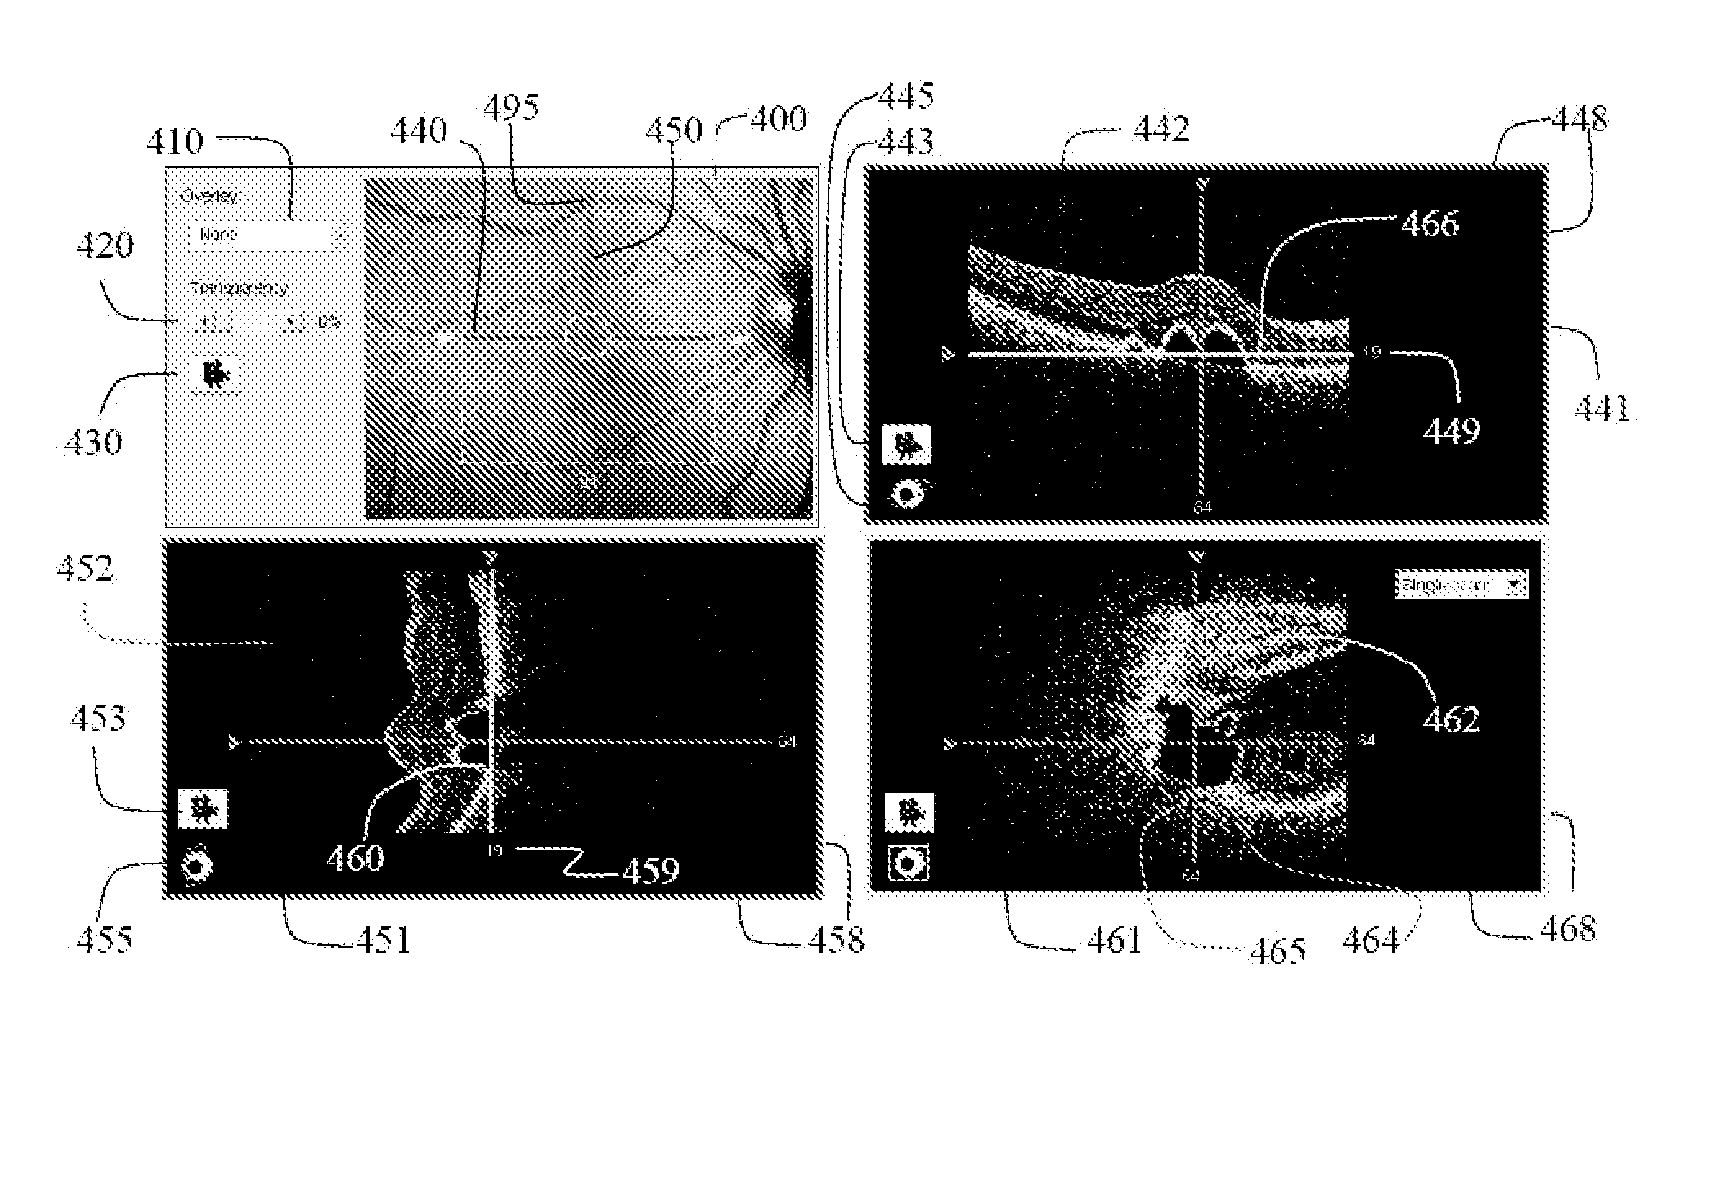 User interface for efficiently displaying relevant OCT imaging data